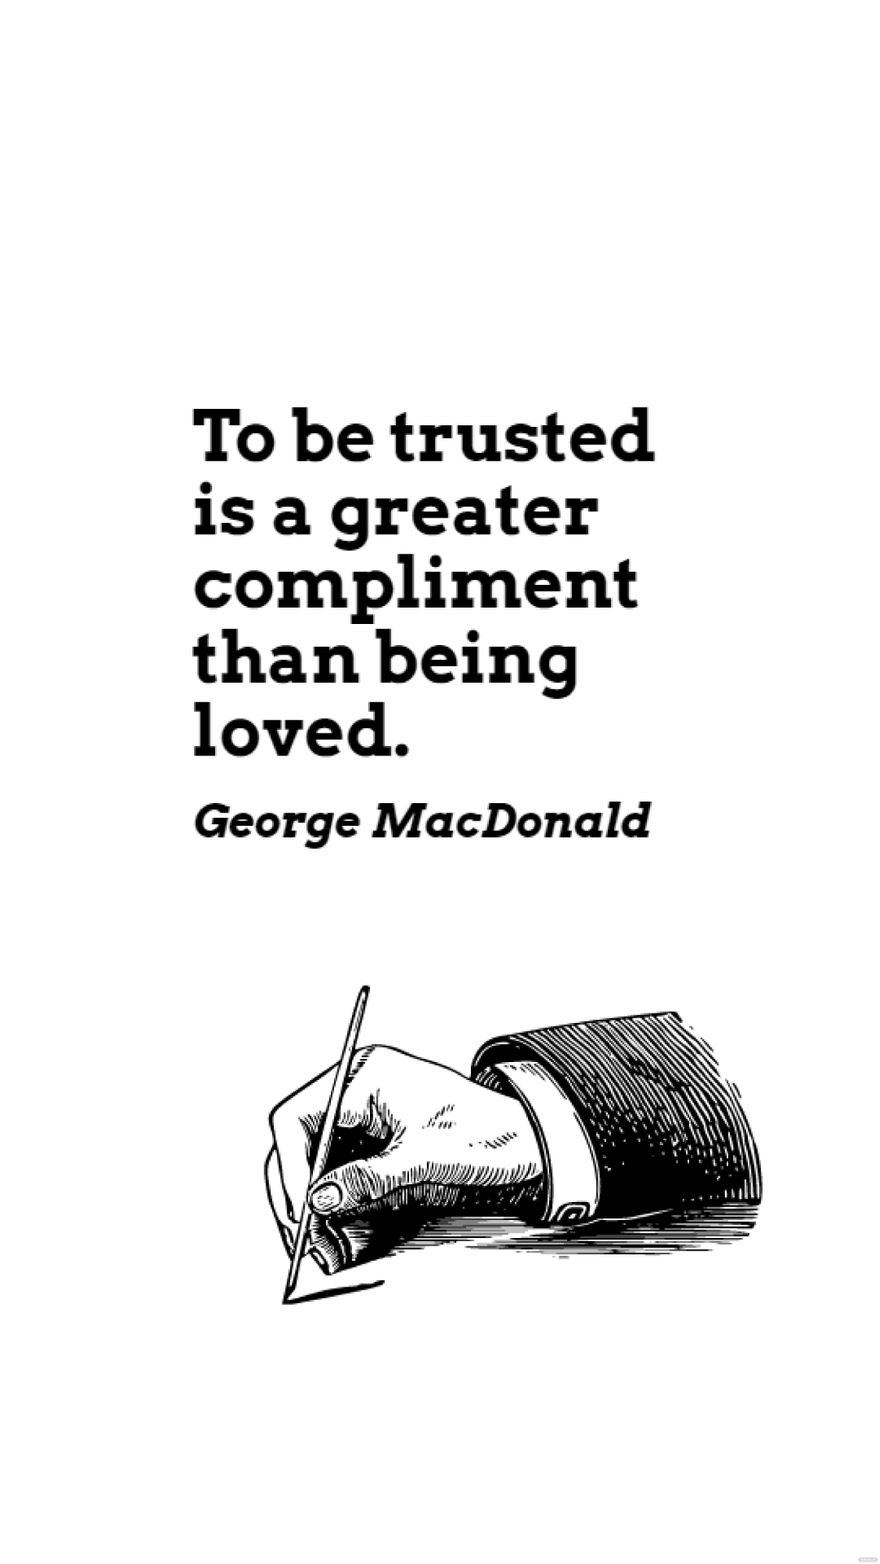 George MacDonald - To be trusted is a greater compliment than being loved. in JPG